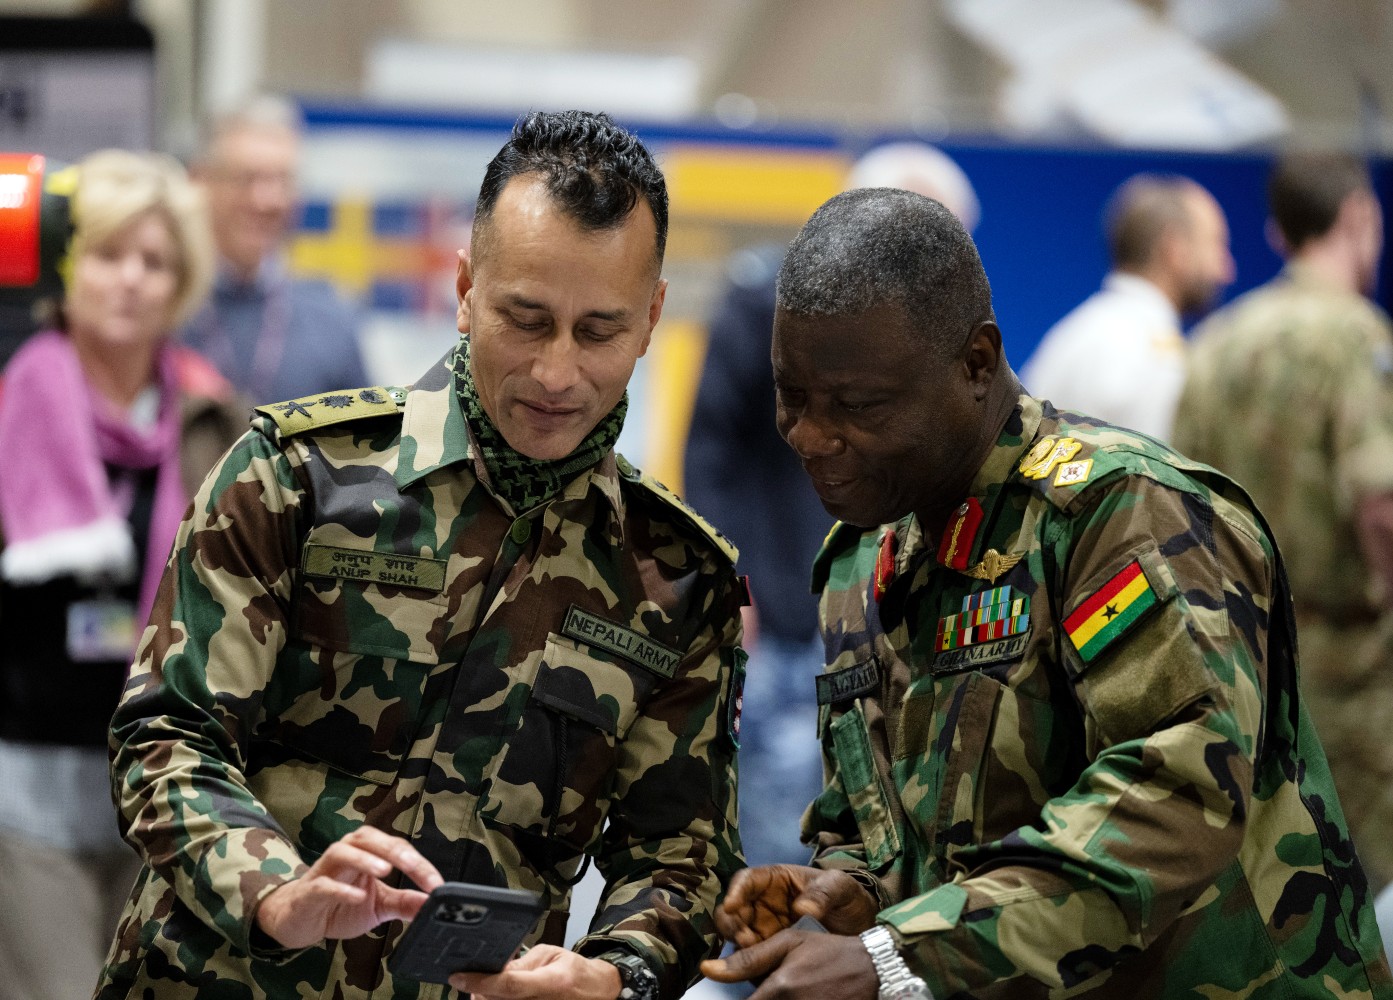 Nepal and Ghana Defence Attaches looking at a phone and smiling.